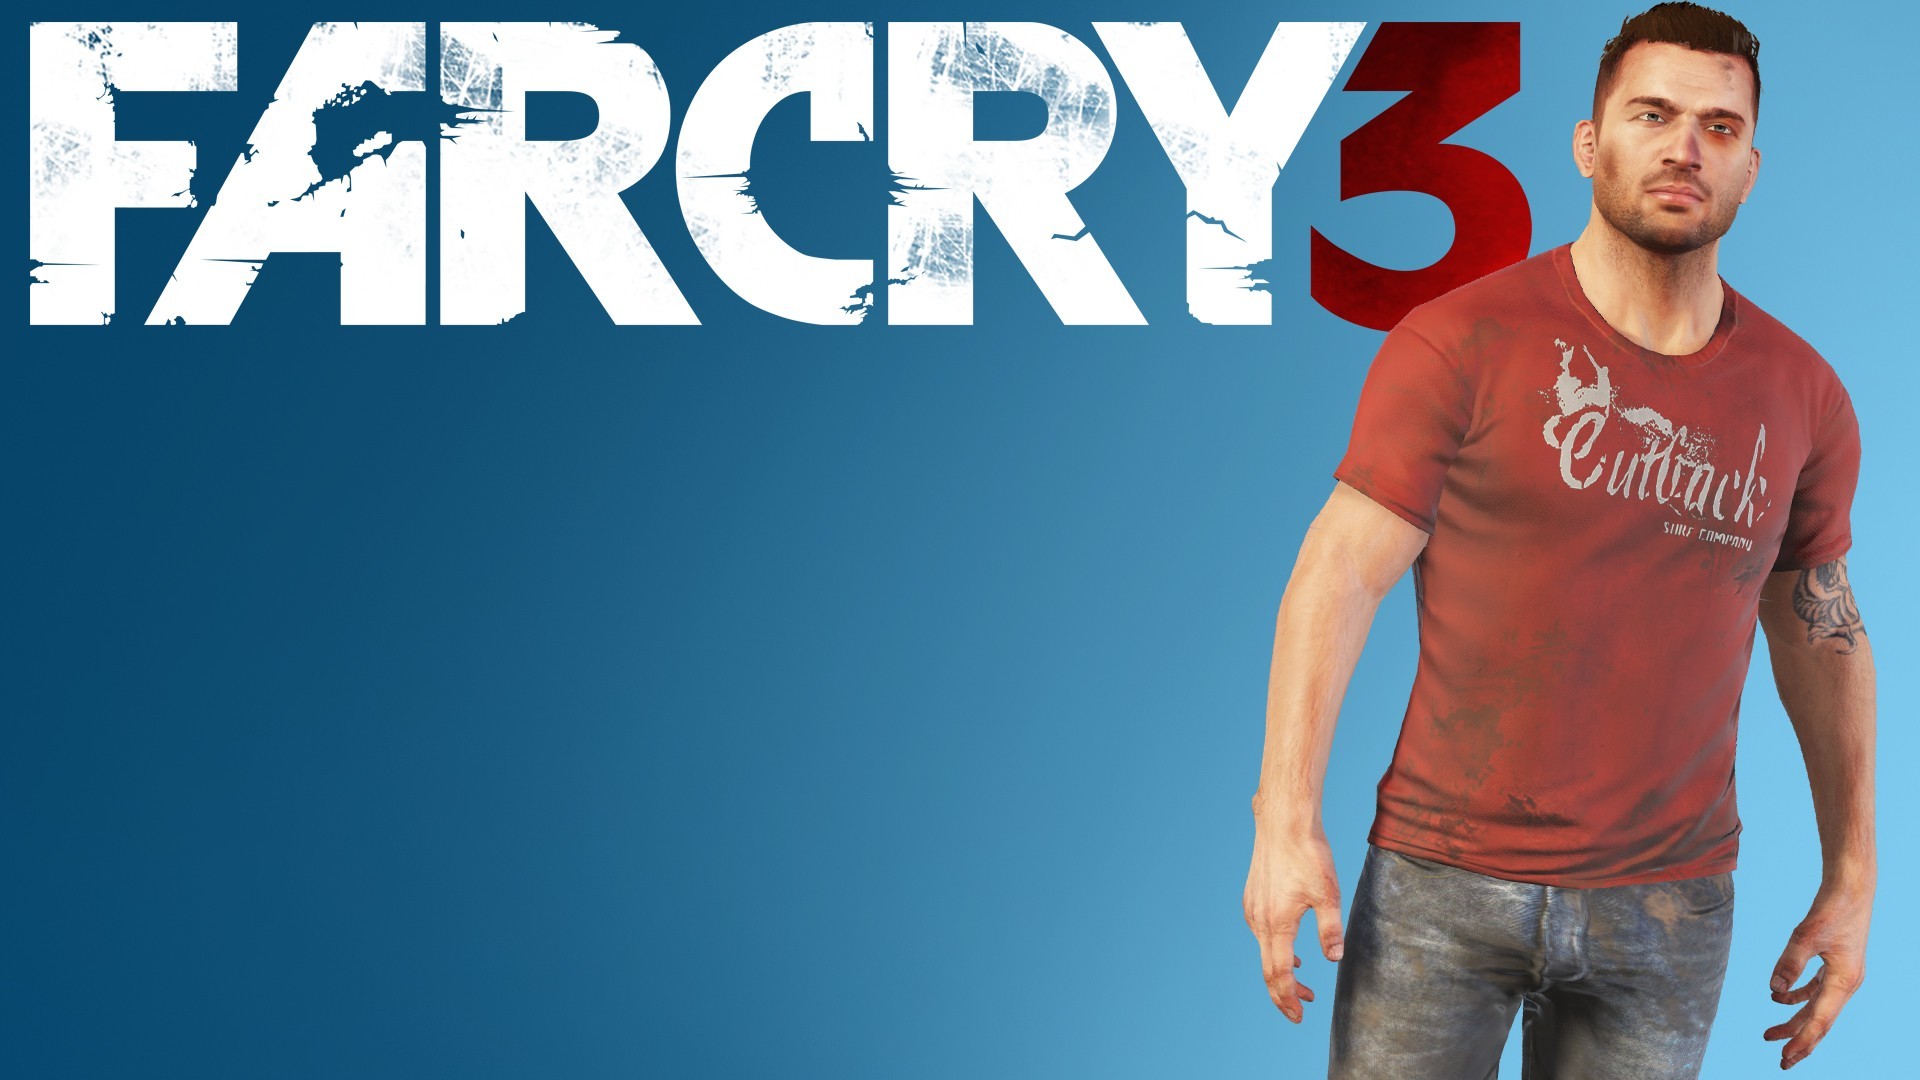 iphone x far cry 3 background